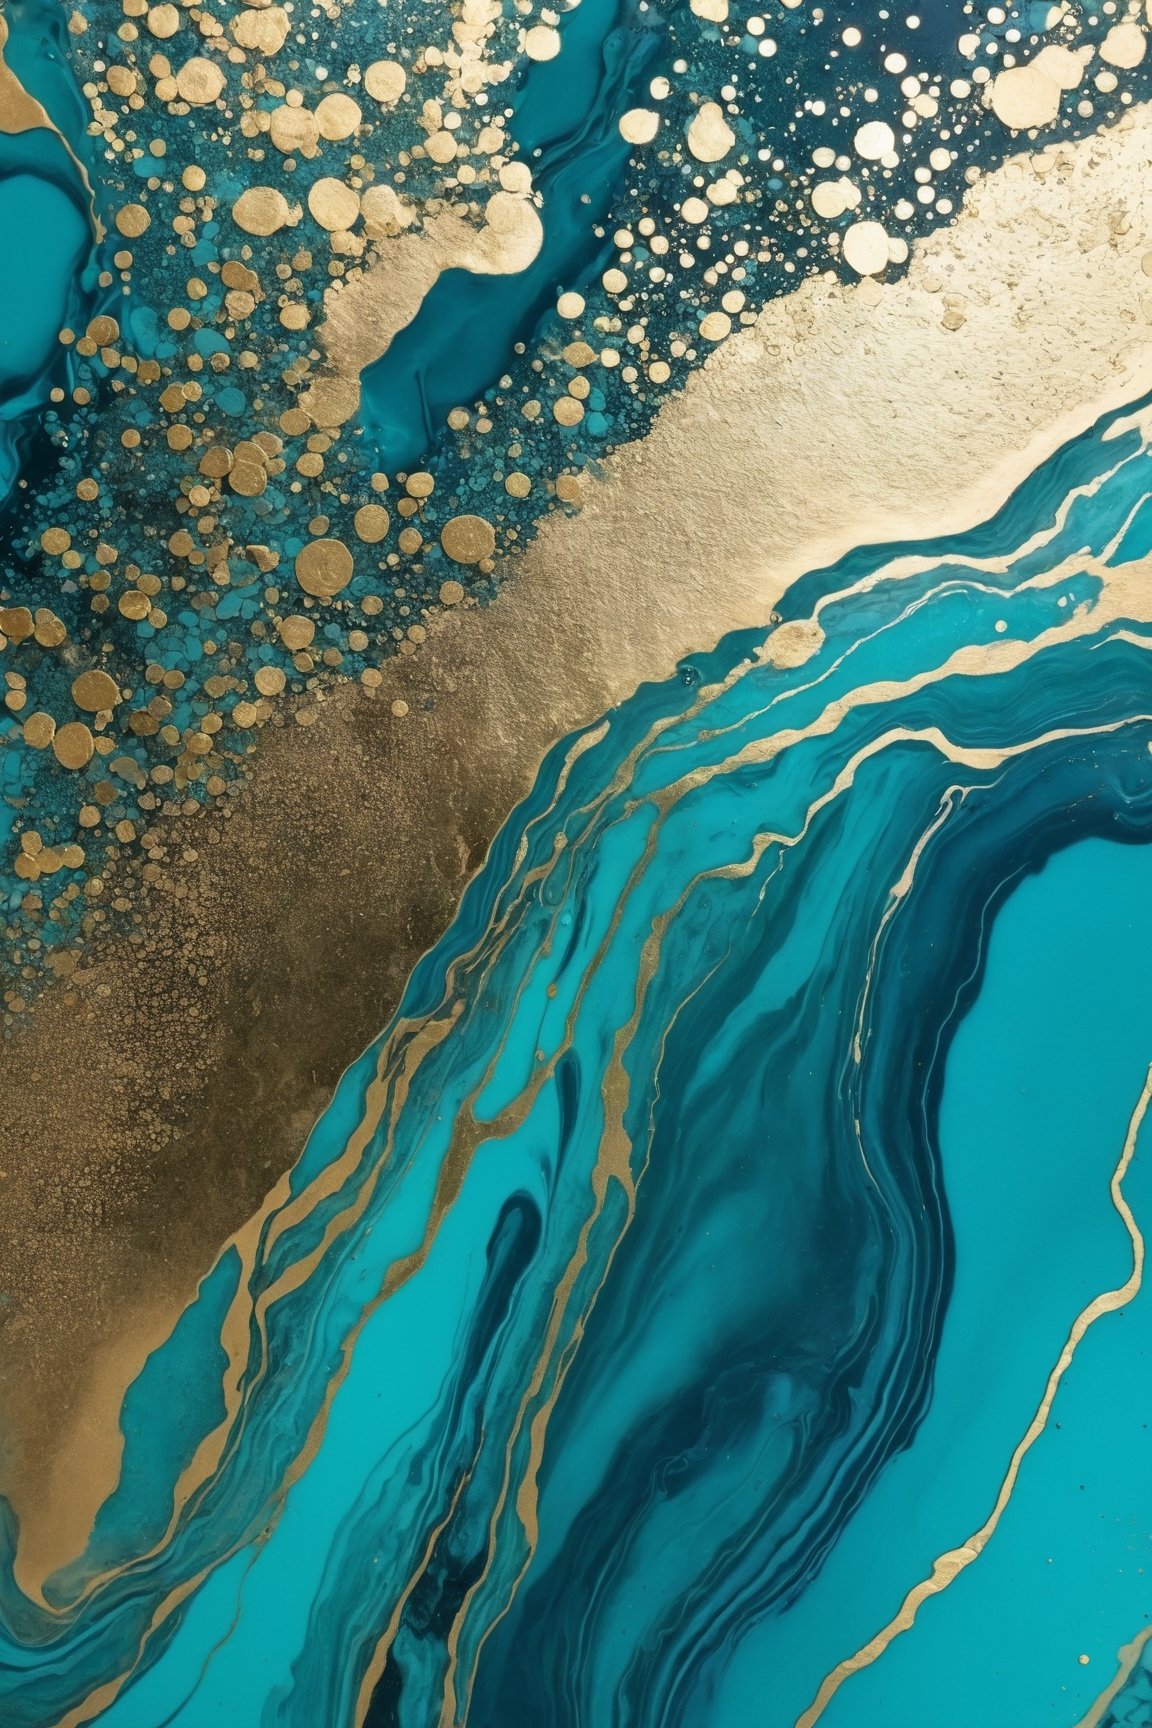 marbling, teal and blue shades, gold liquid